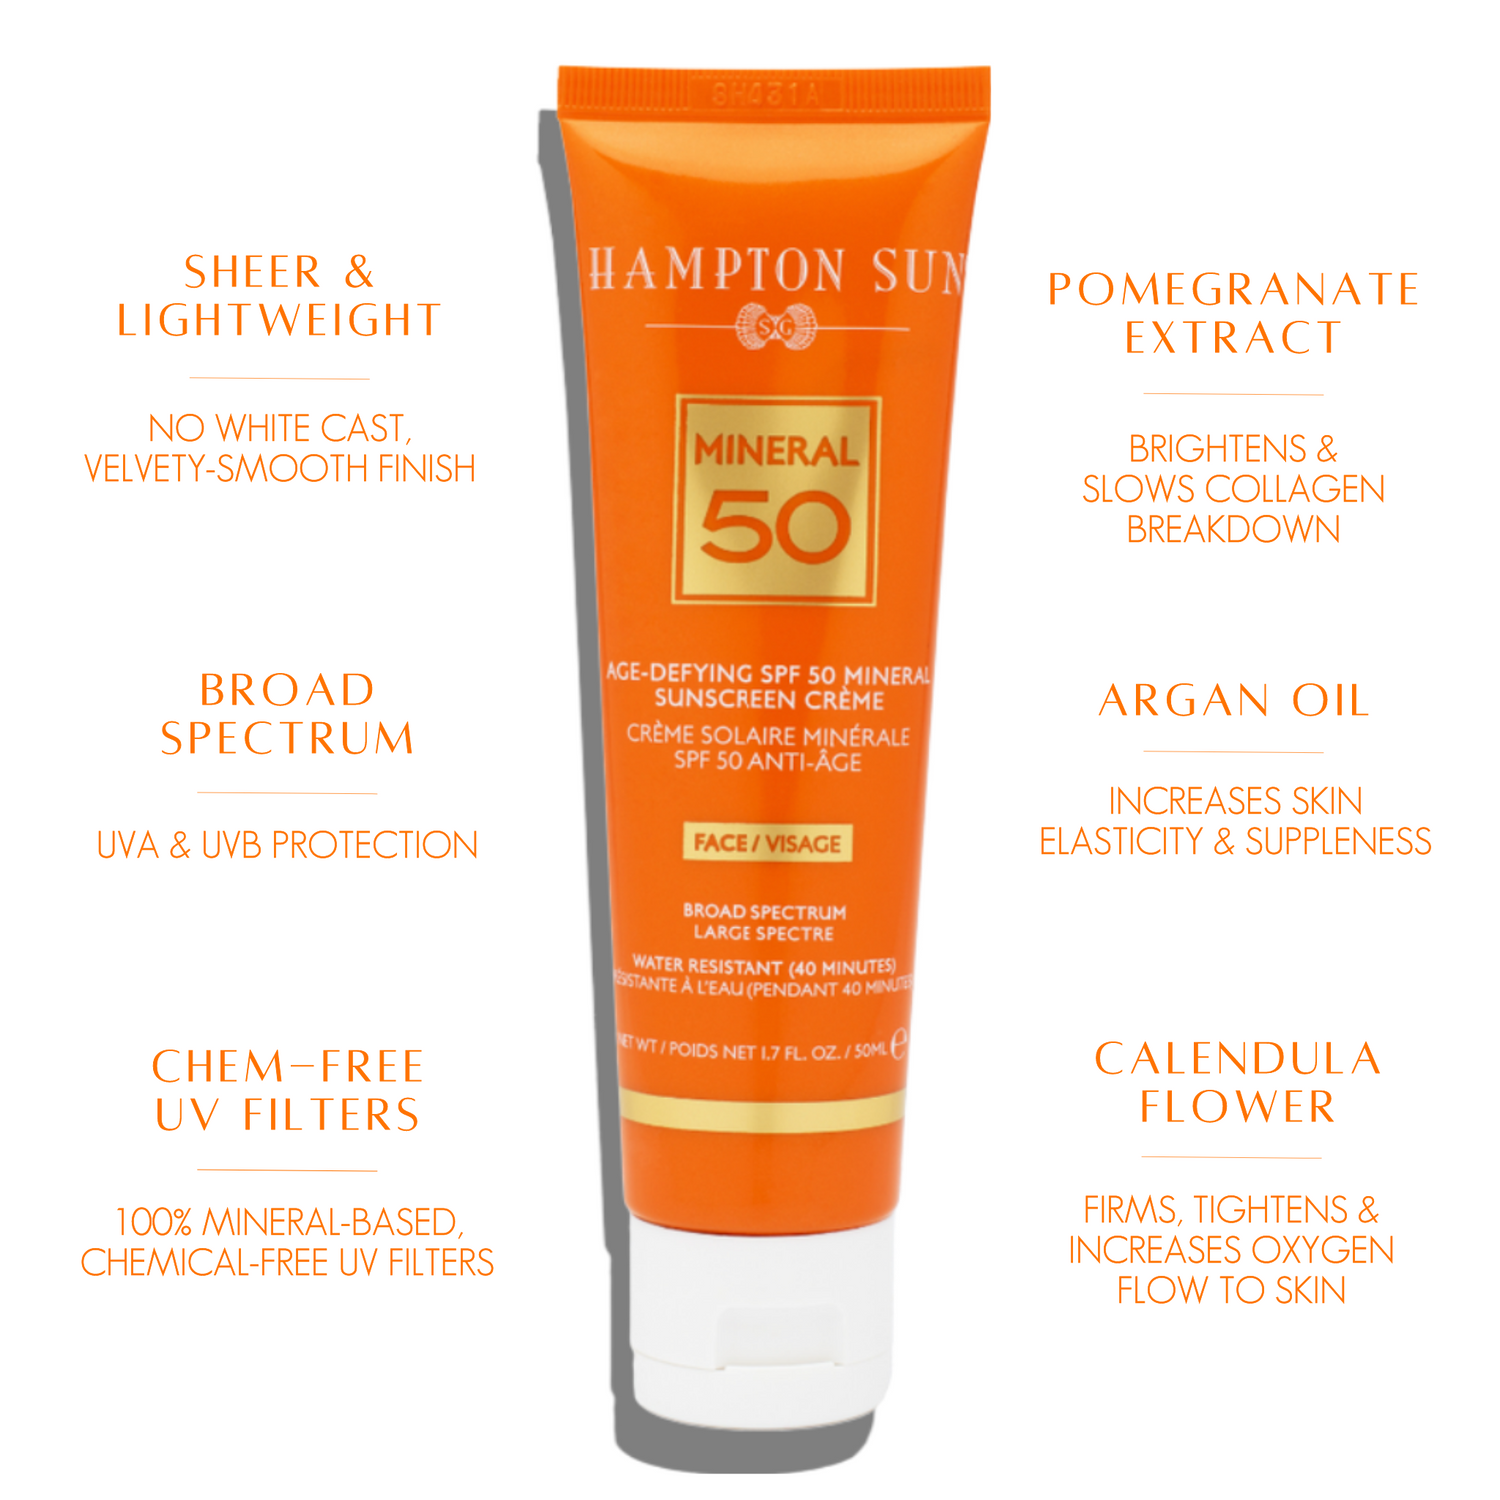 Age-Defying SPF 50 Mineral Crème for Face